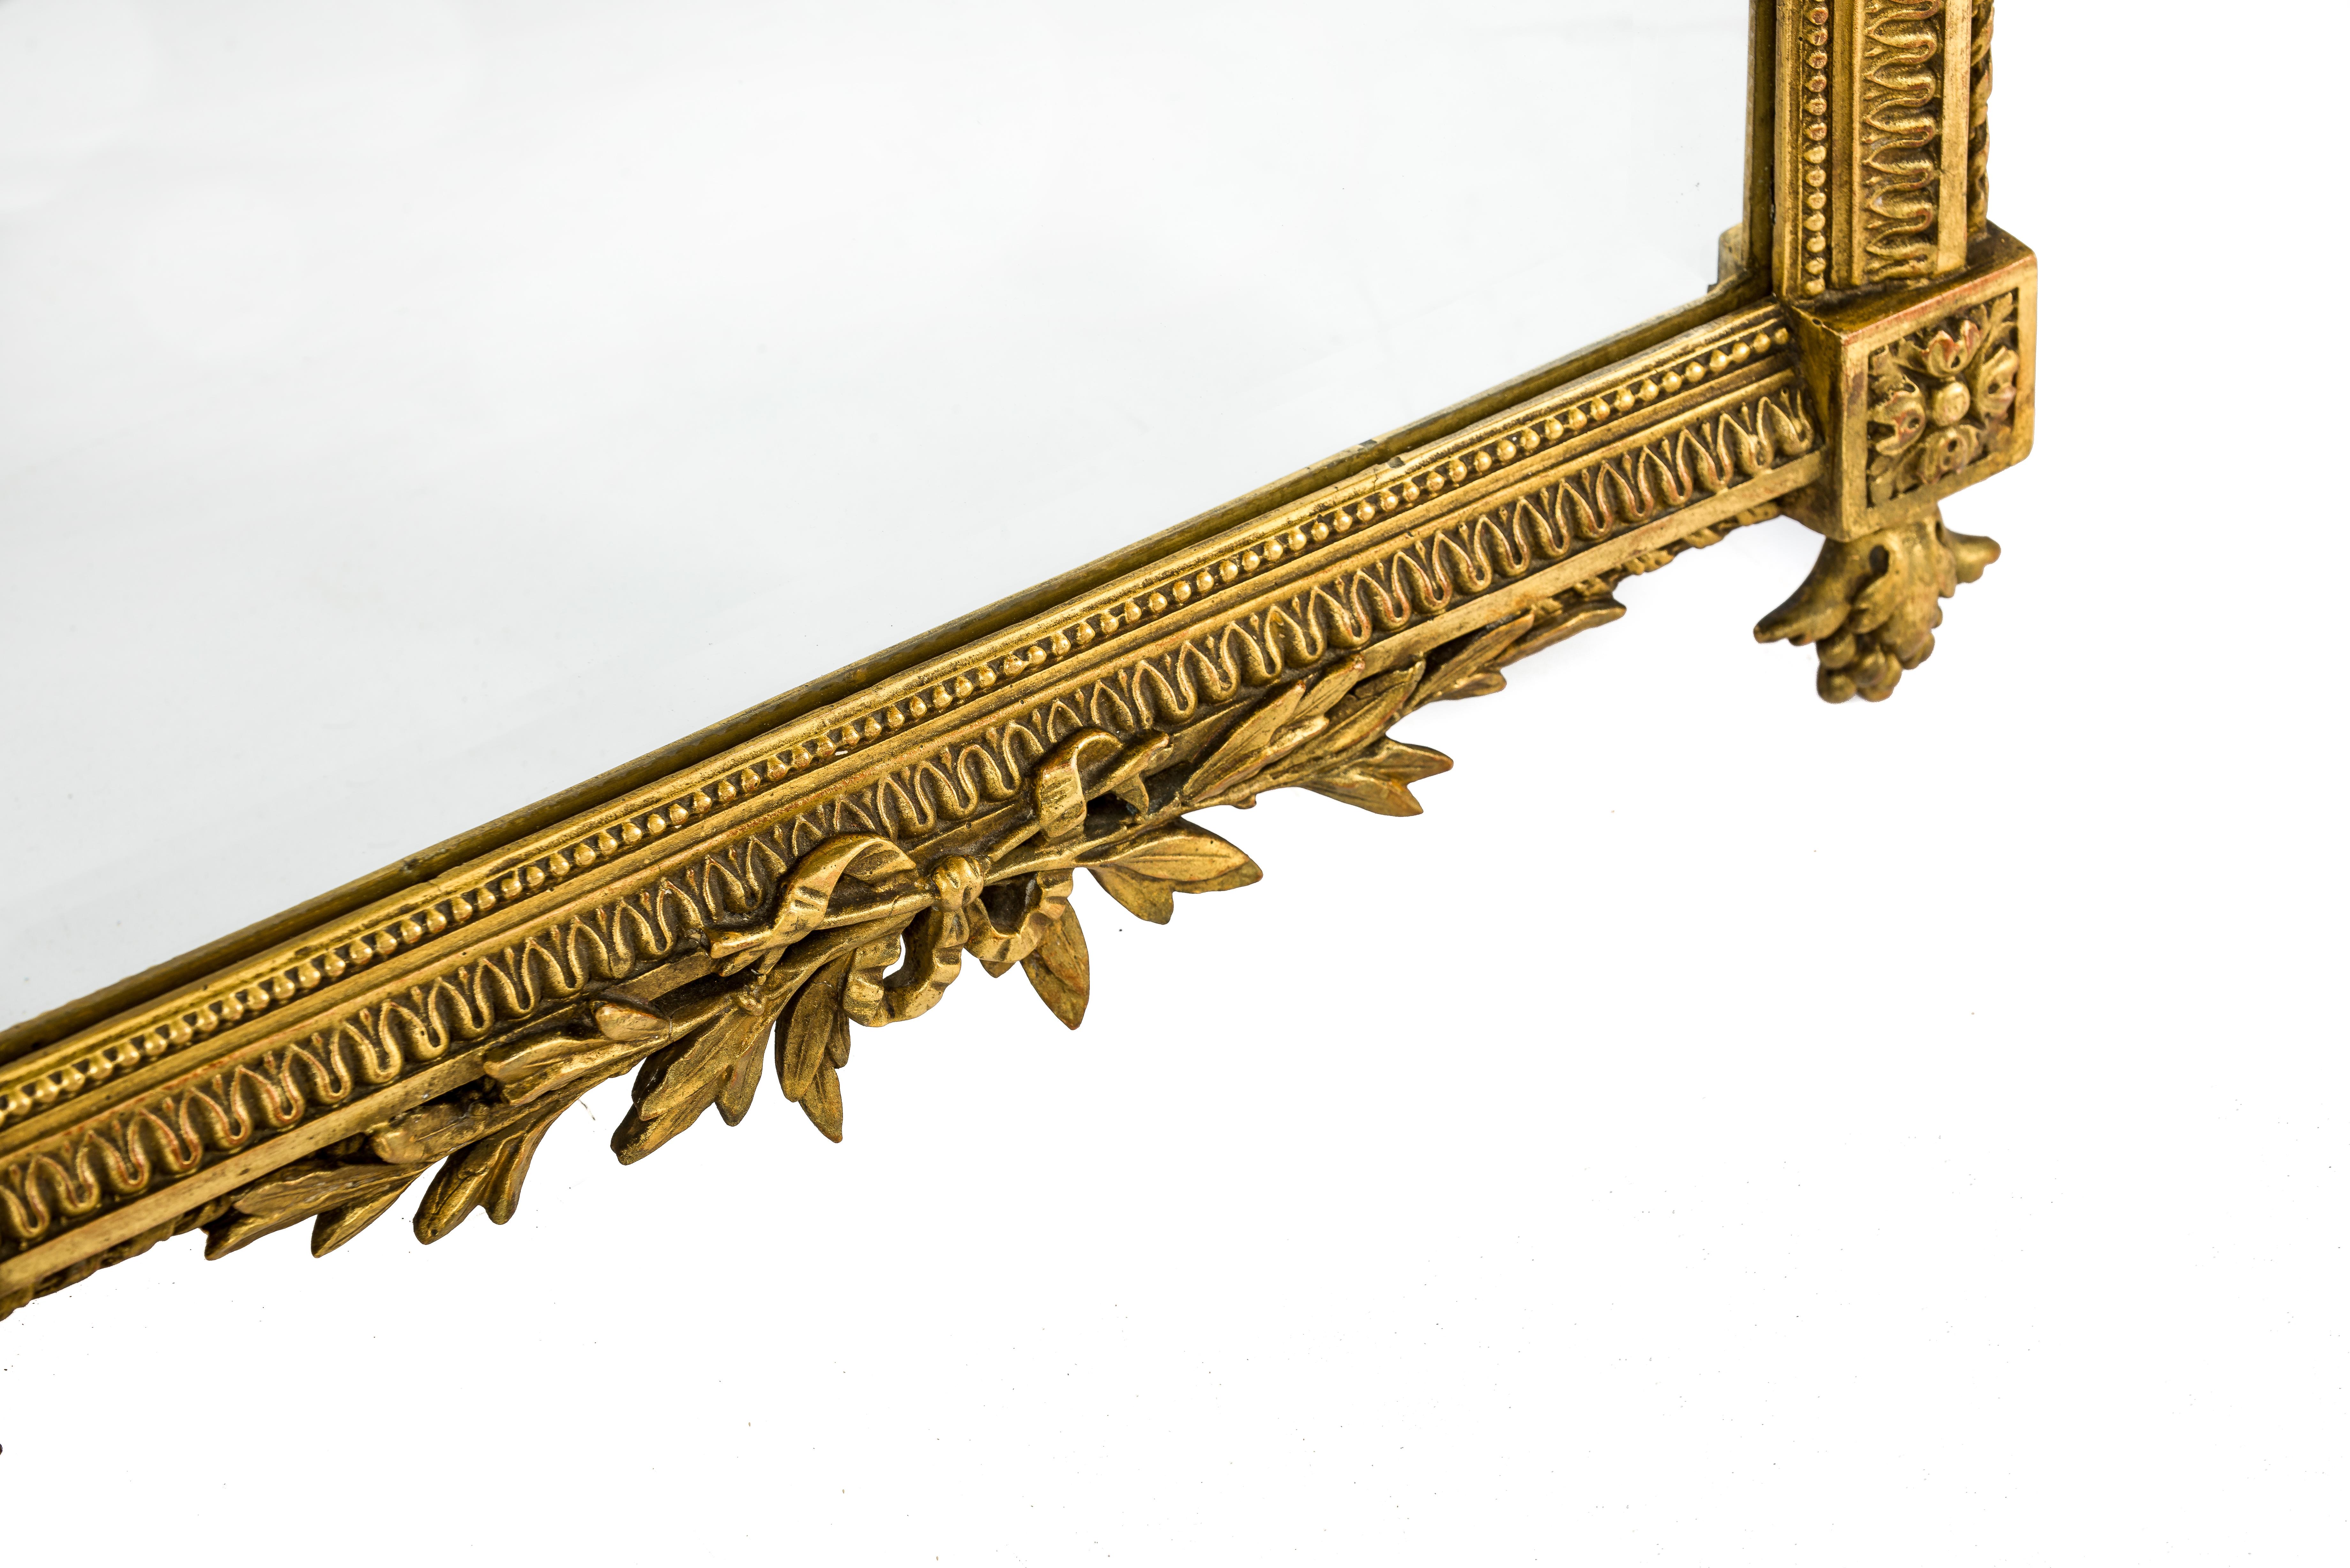 Gesso Antique 19th Century French Louis Seize Gold Gilt Mirror with Faceted Glass